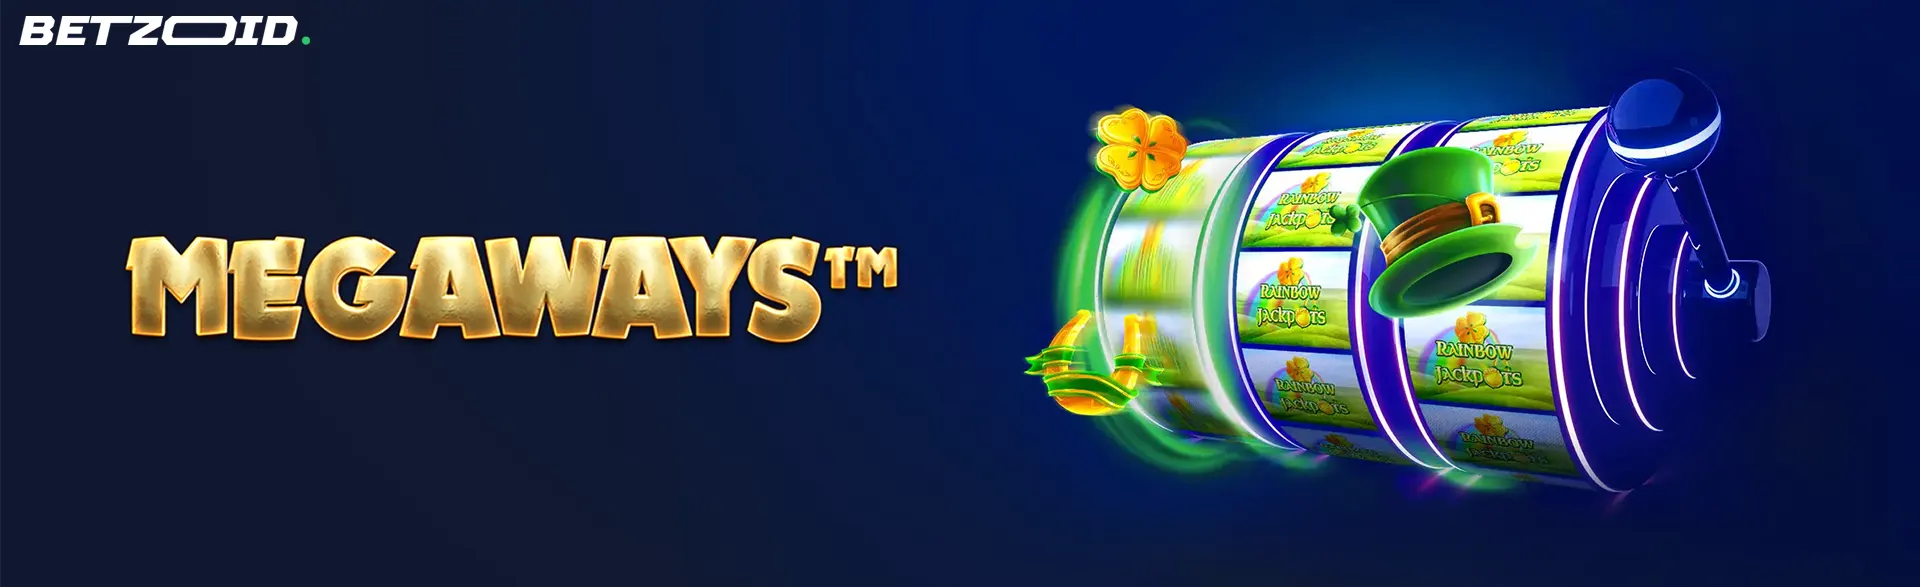 Free spins no deposit at Canada online casinos in the Rainbow Riches game from Megaways.